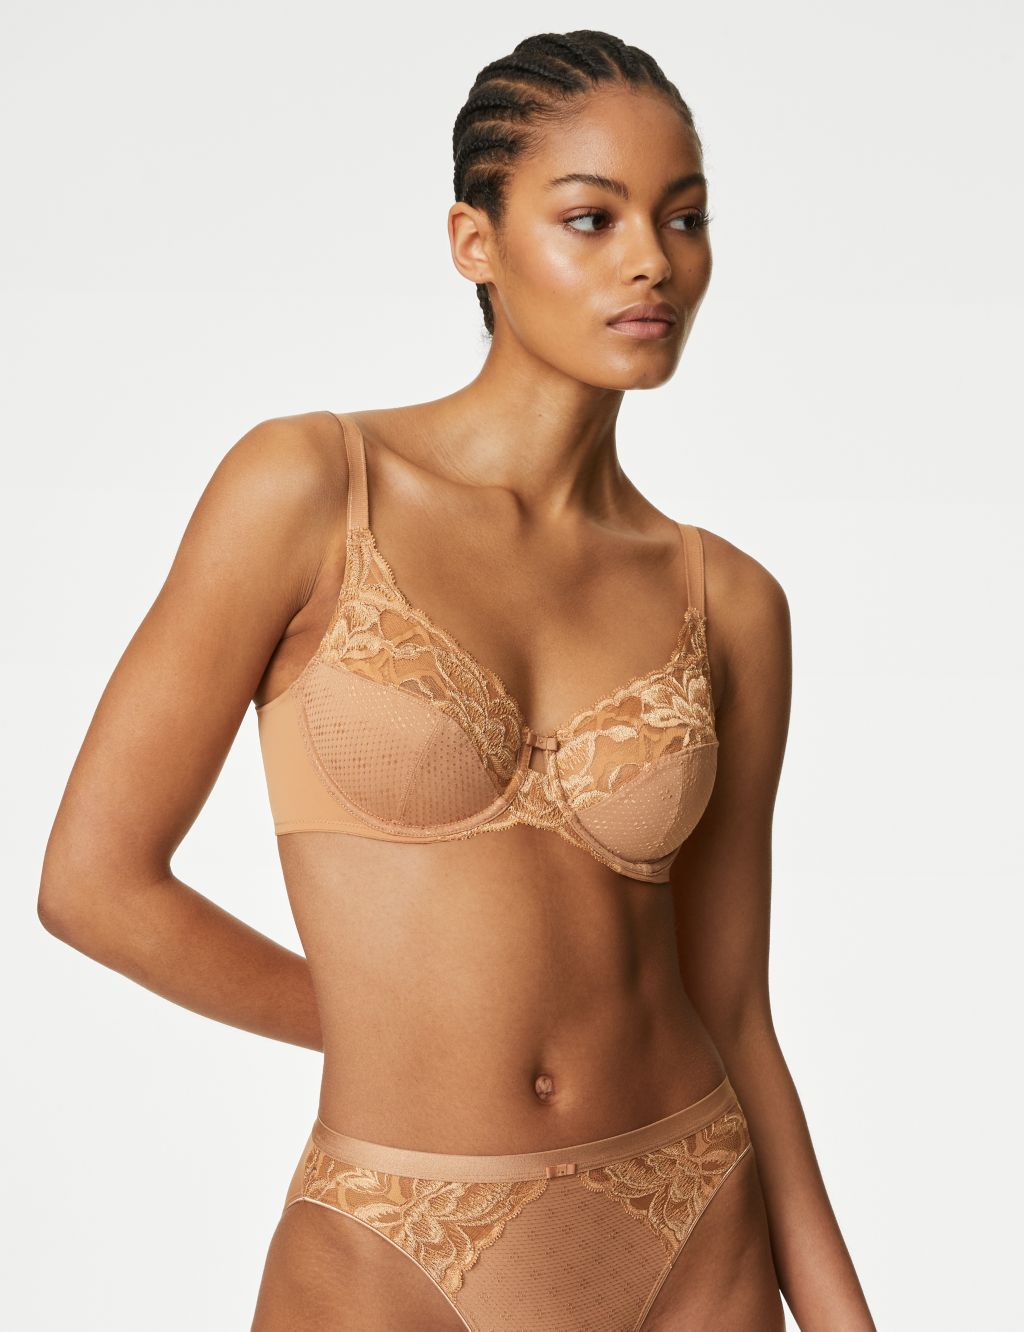 Marks & Spencer Rich Amber Underwired Full Cup Bra in 34C 36B 40B